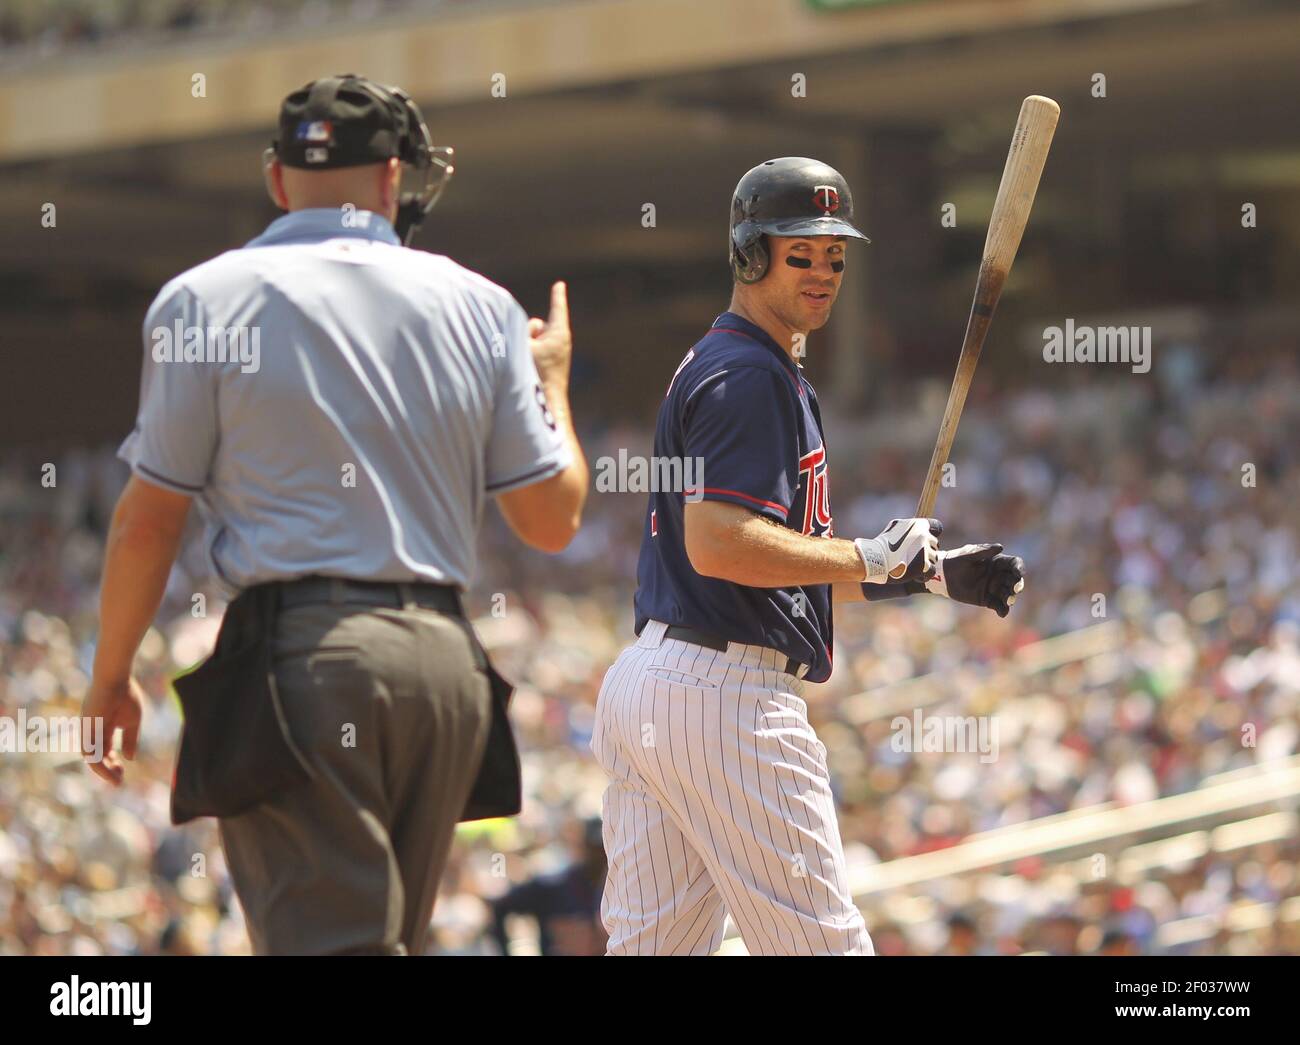 American League's Joe Mauer of the Minnesota Twins at bat during the MLB  baseball Home Run Derby in St. Louis, Monday, July 13, 2009. (AP Photo/Jeff  Roberson Stock Photo - Alamy